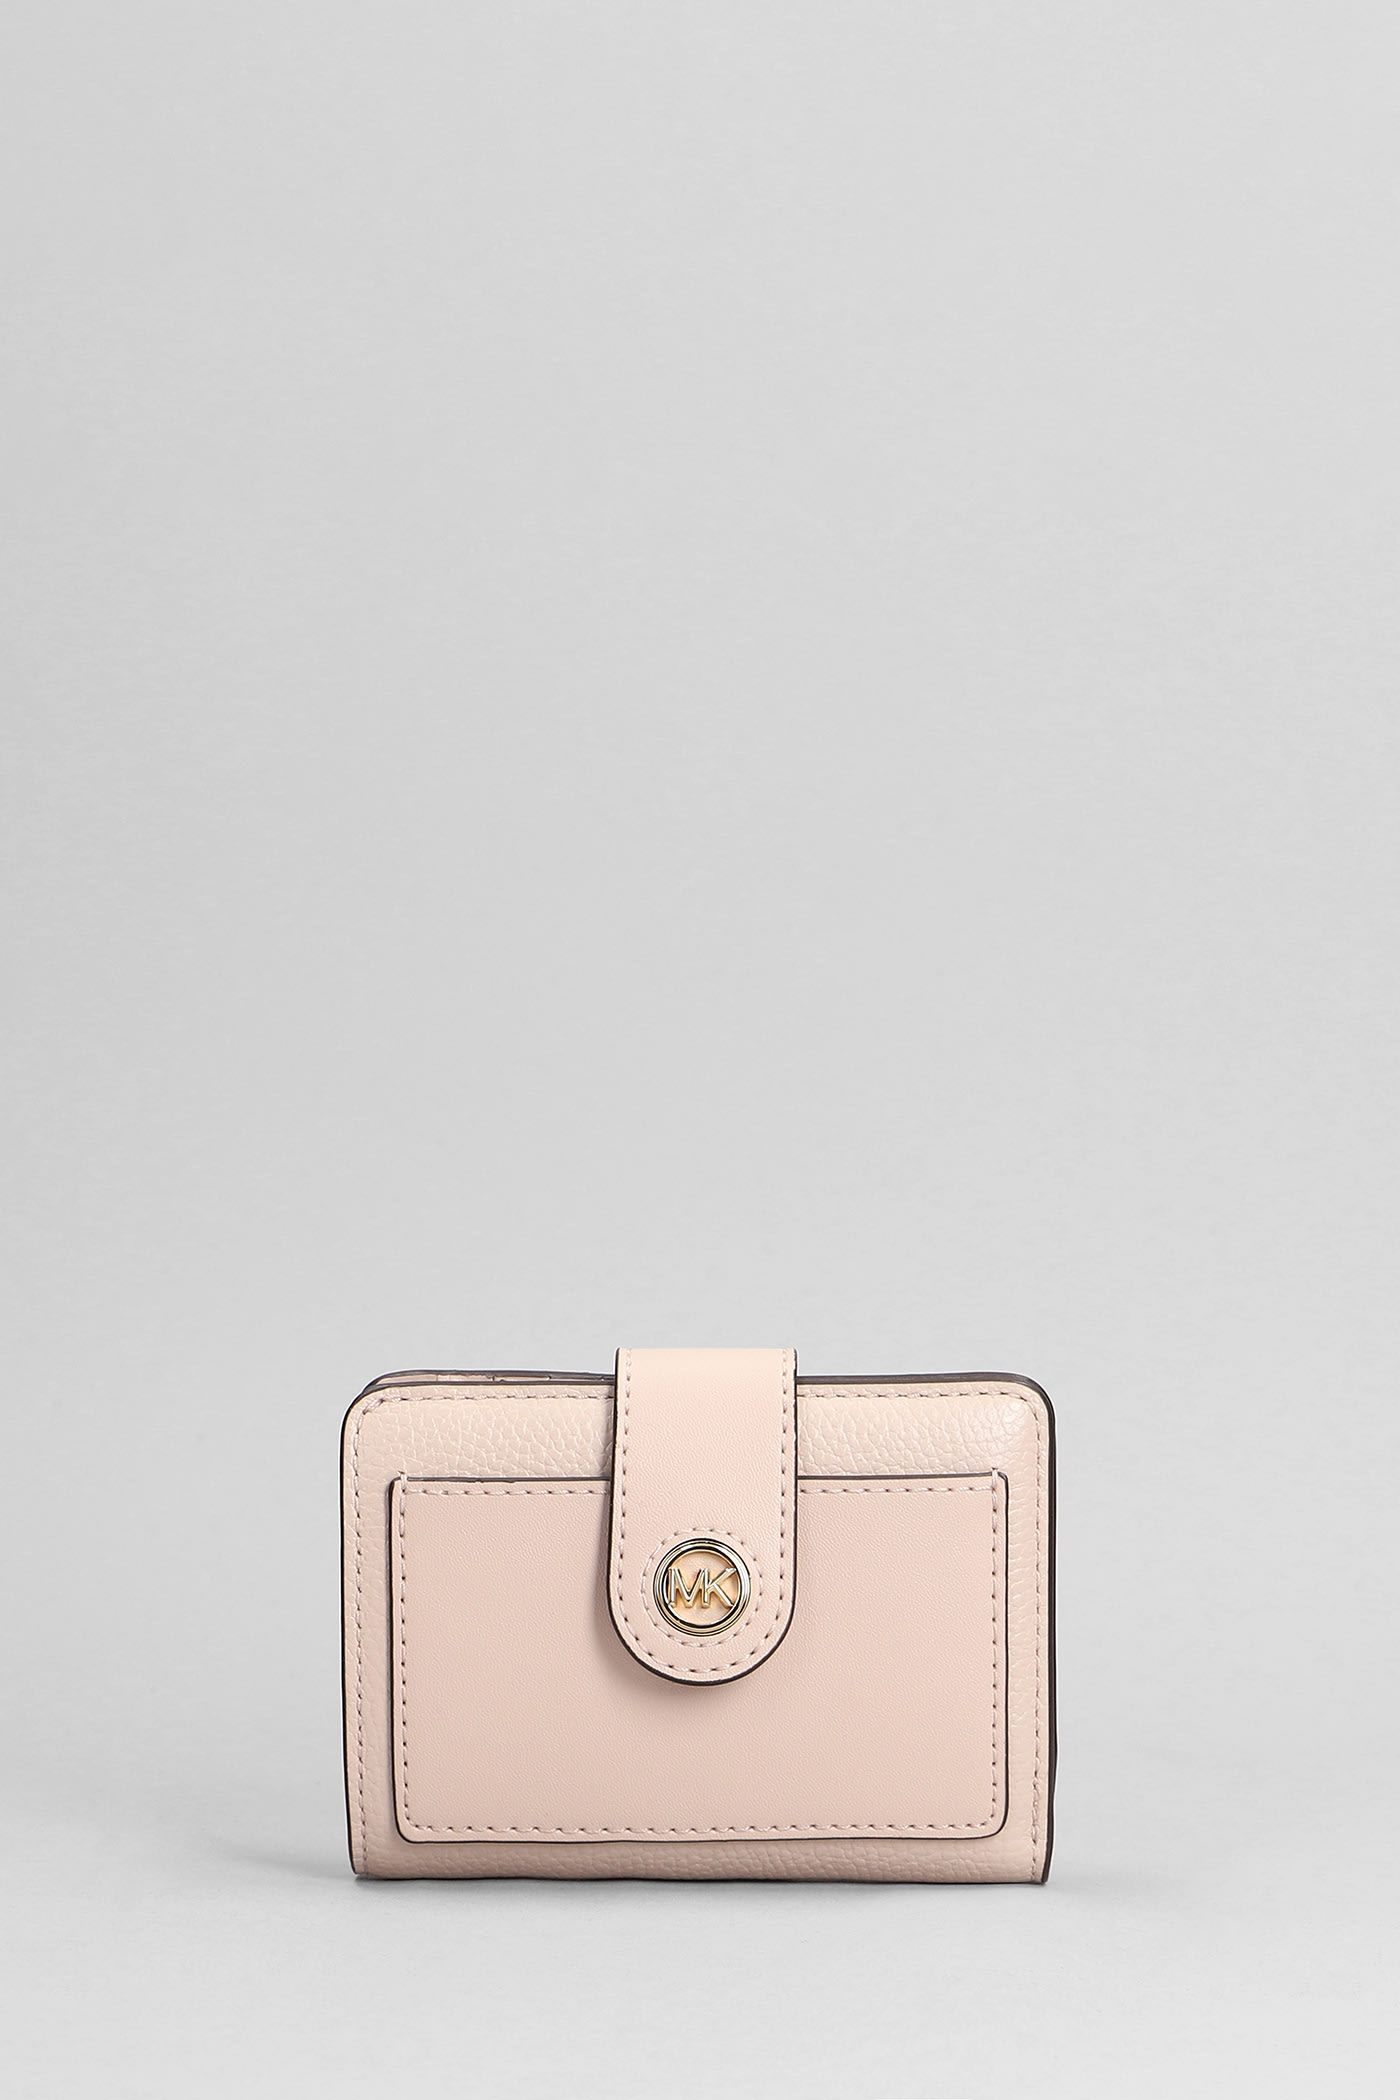 Michael Kors Mk Charm Wallet In Rose-pink Leather